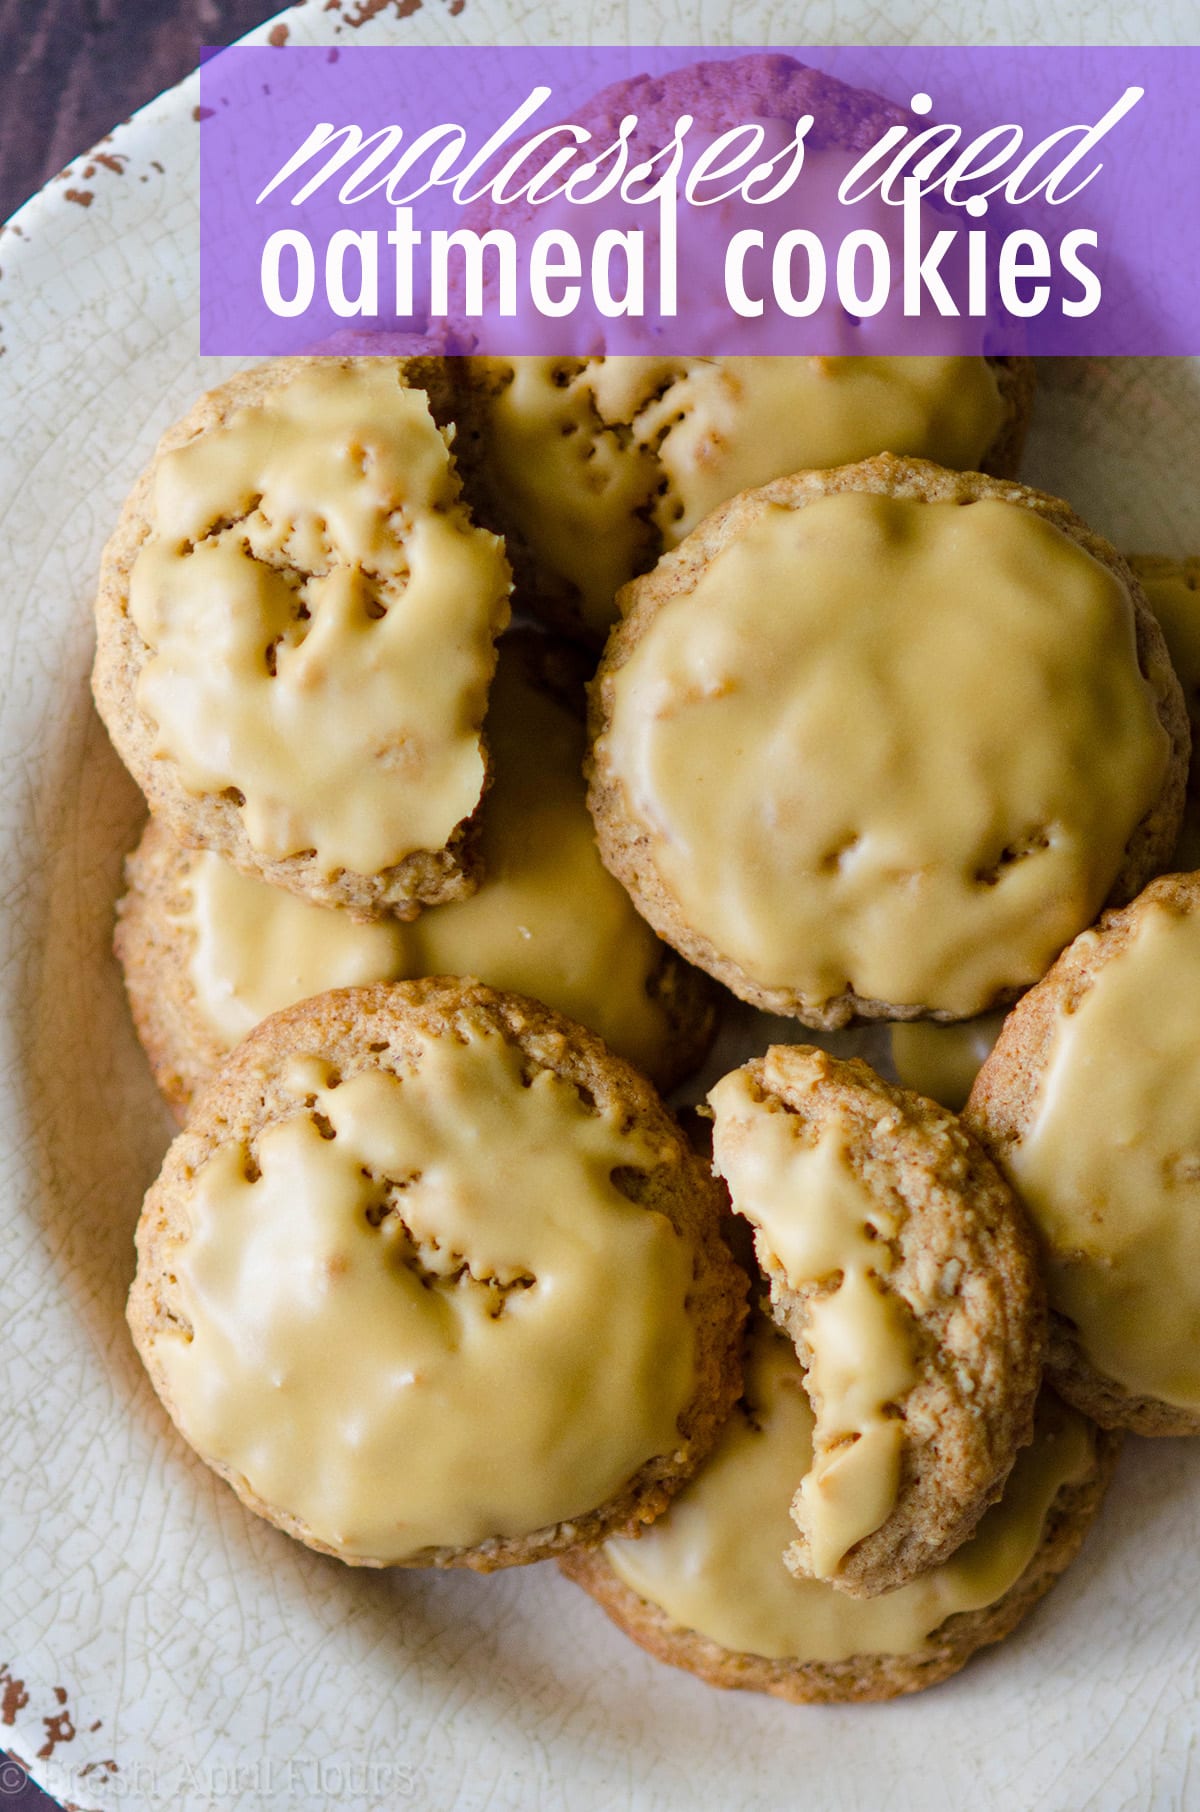 Molasses Iced Oatmeal Cookies: Quick and easy oatmeal cookies covered in a sweet and bold-flavored molasses icing. via @frshaprilflours